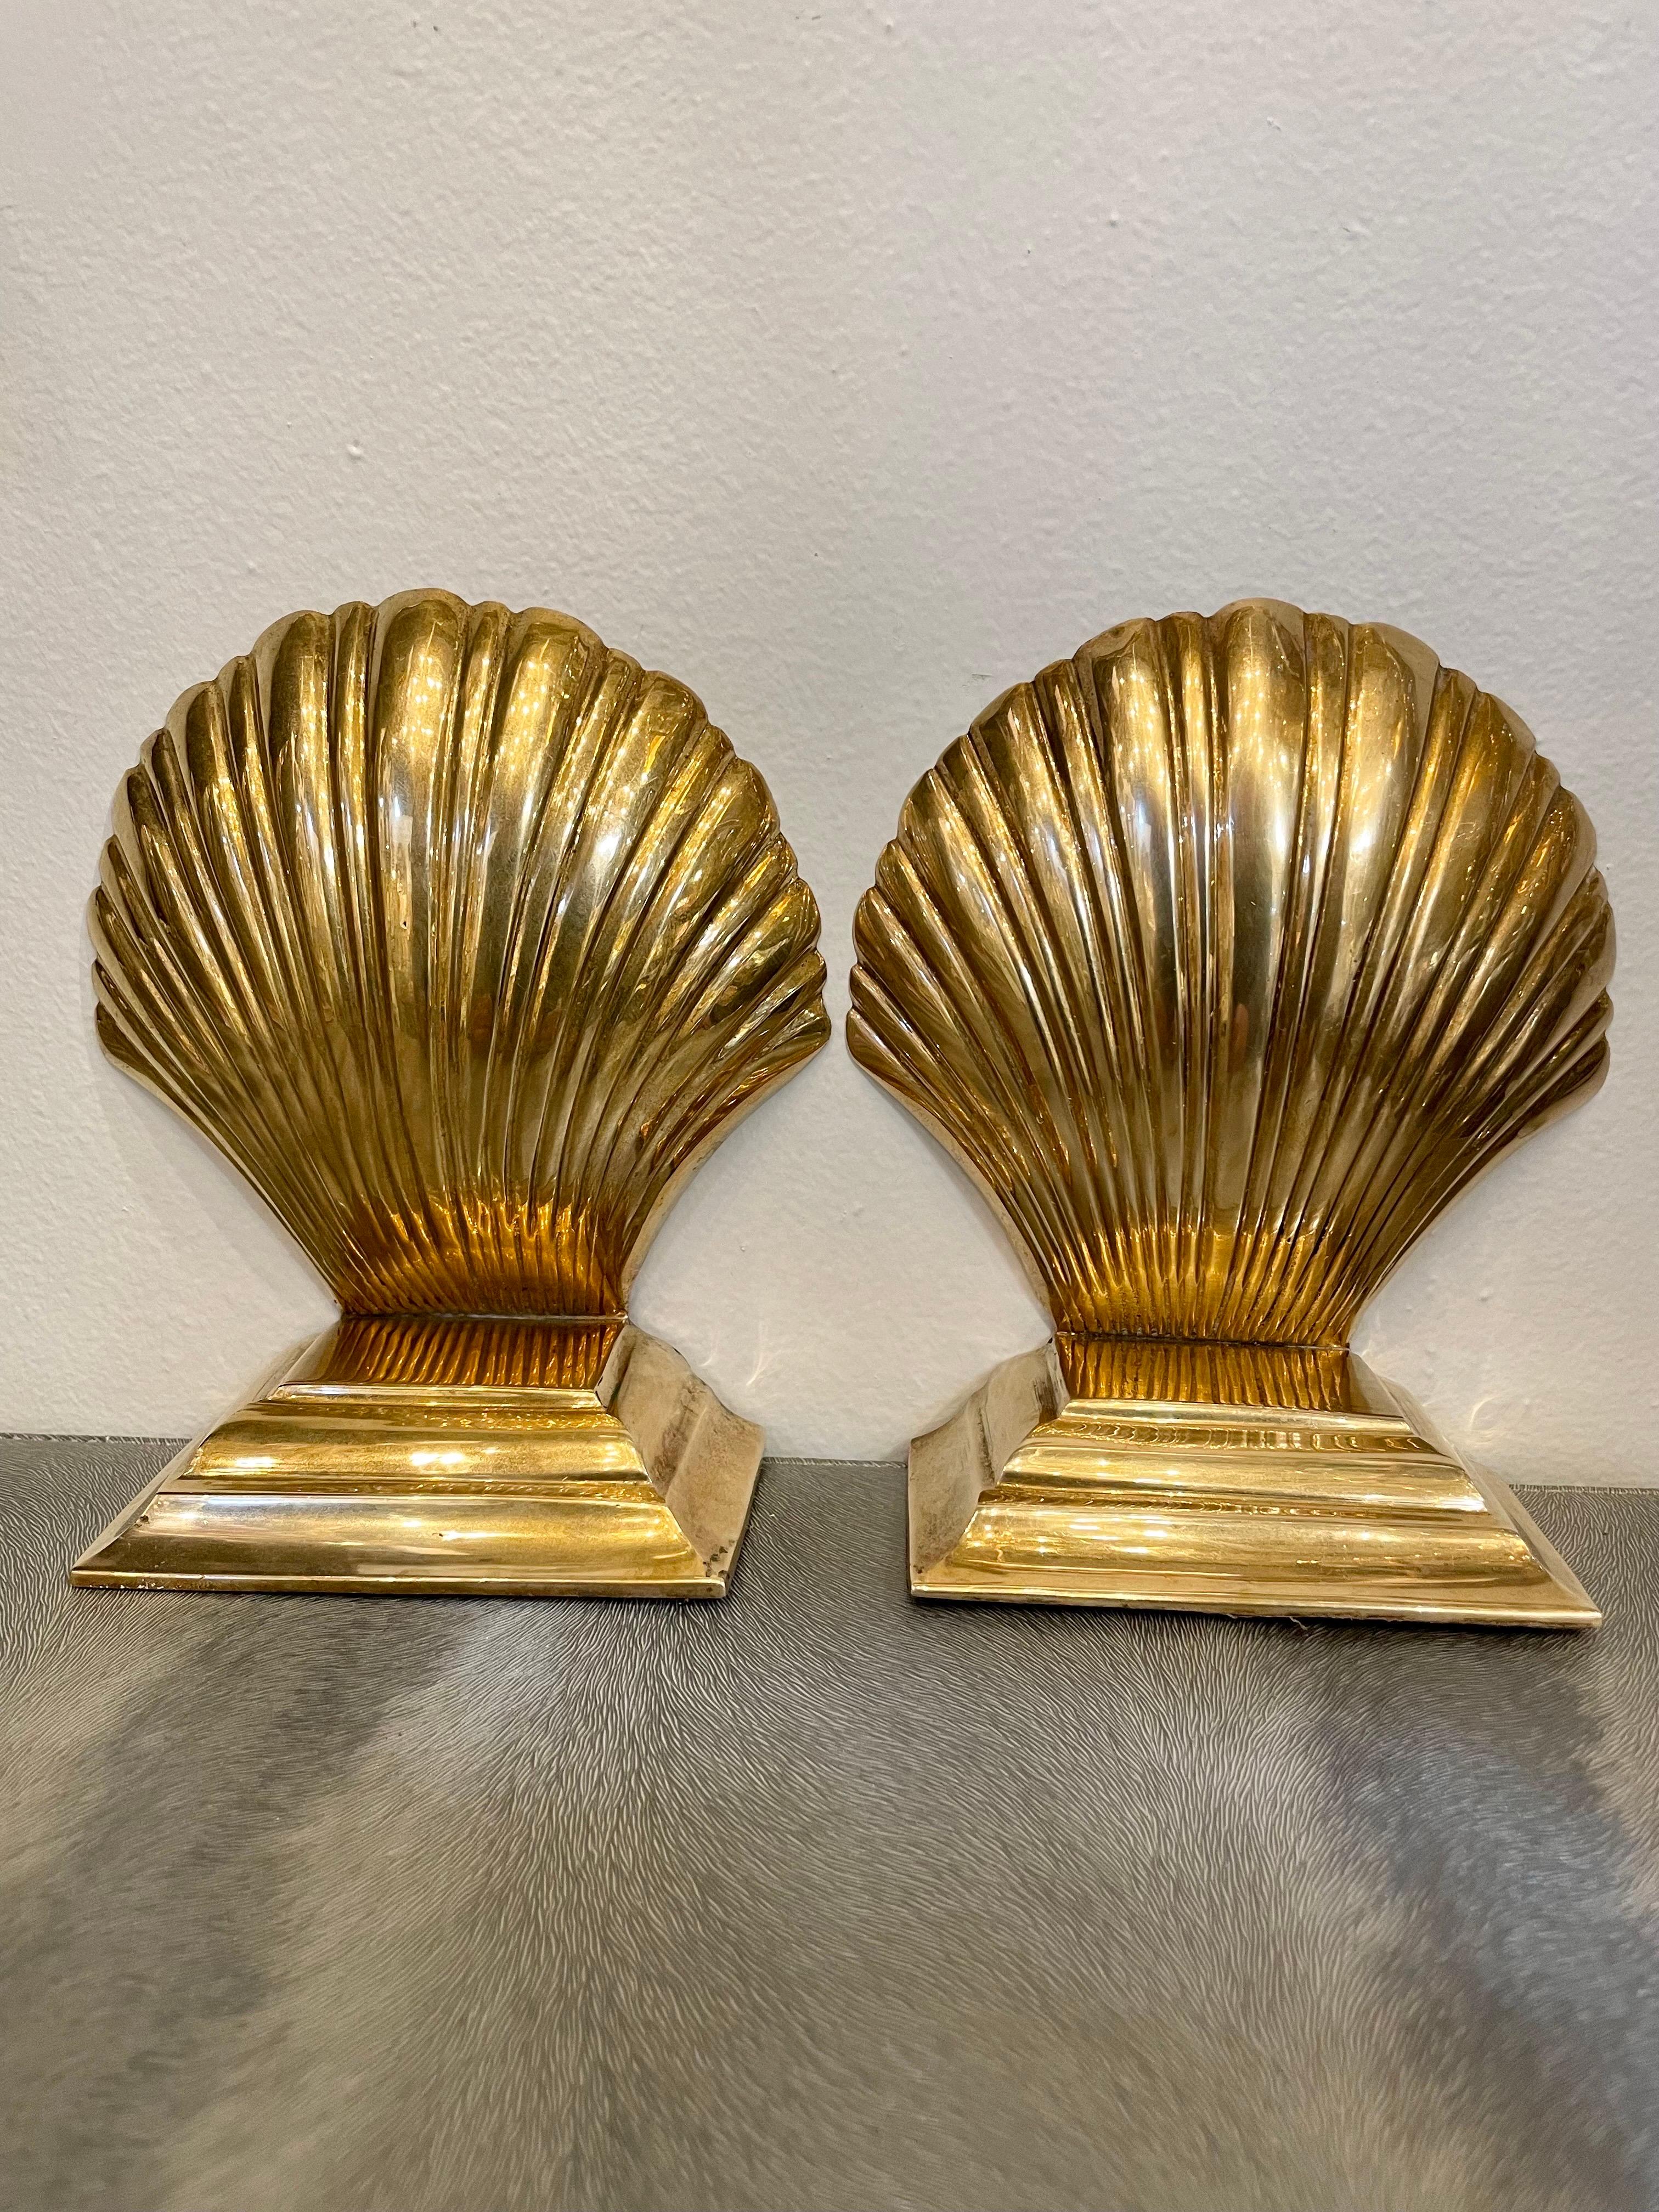 Vintage stepped brass clam shell seashell bookends. Larger size. Good condition. Has nice size to hold a stack of books. Great for your beach house! Any dark areas are reflection only.